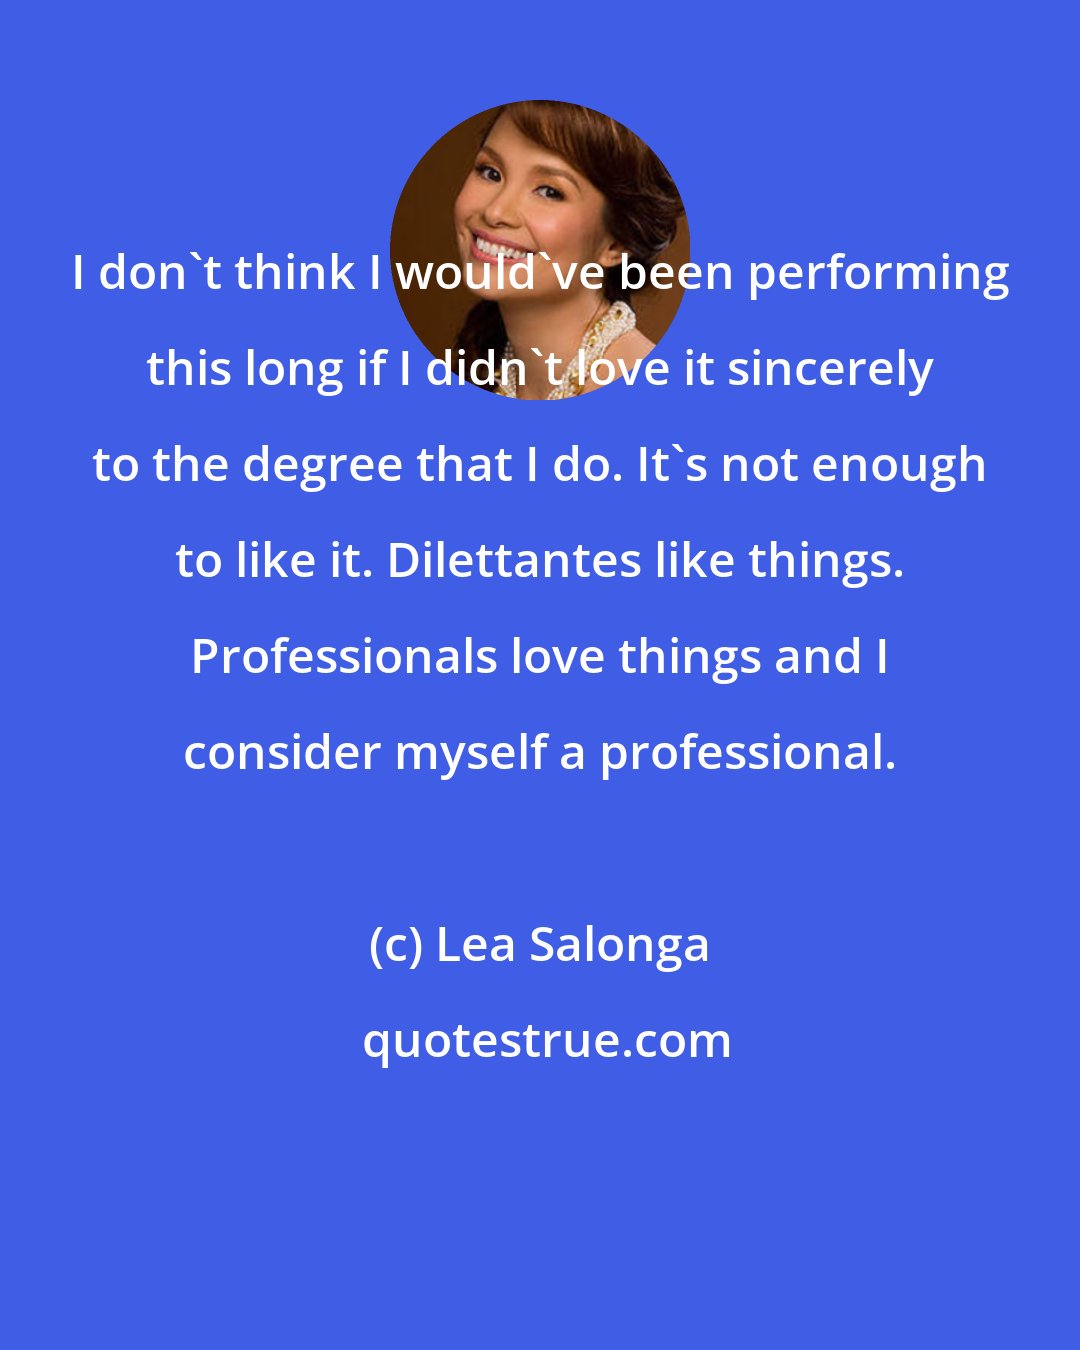 Lea Salonga: I don't think I would've been performing this long if I didn't love it sincerely to the degree that I do. It's not enough to like it. Dilettantes like things. Professionals love things and I consider myself a professional.